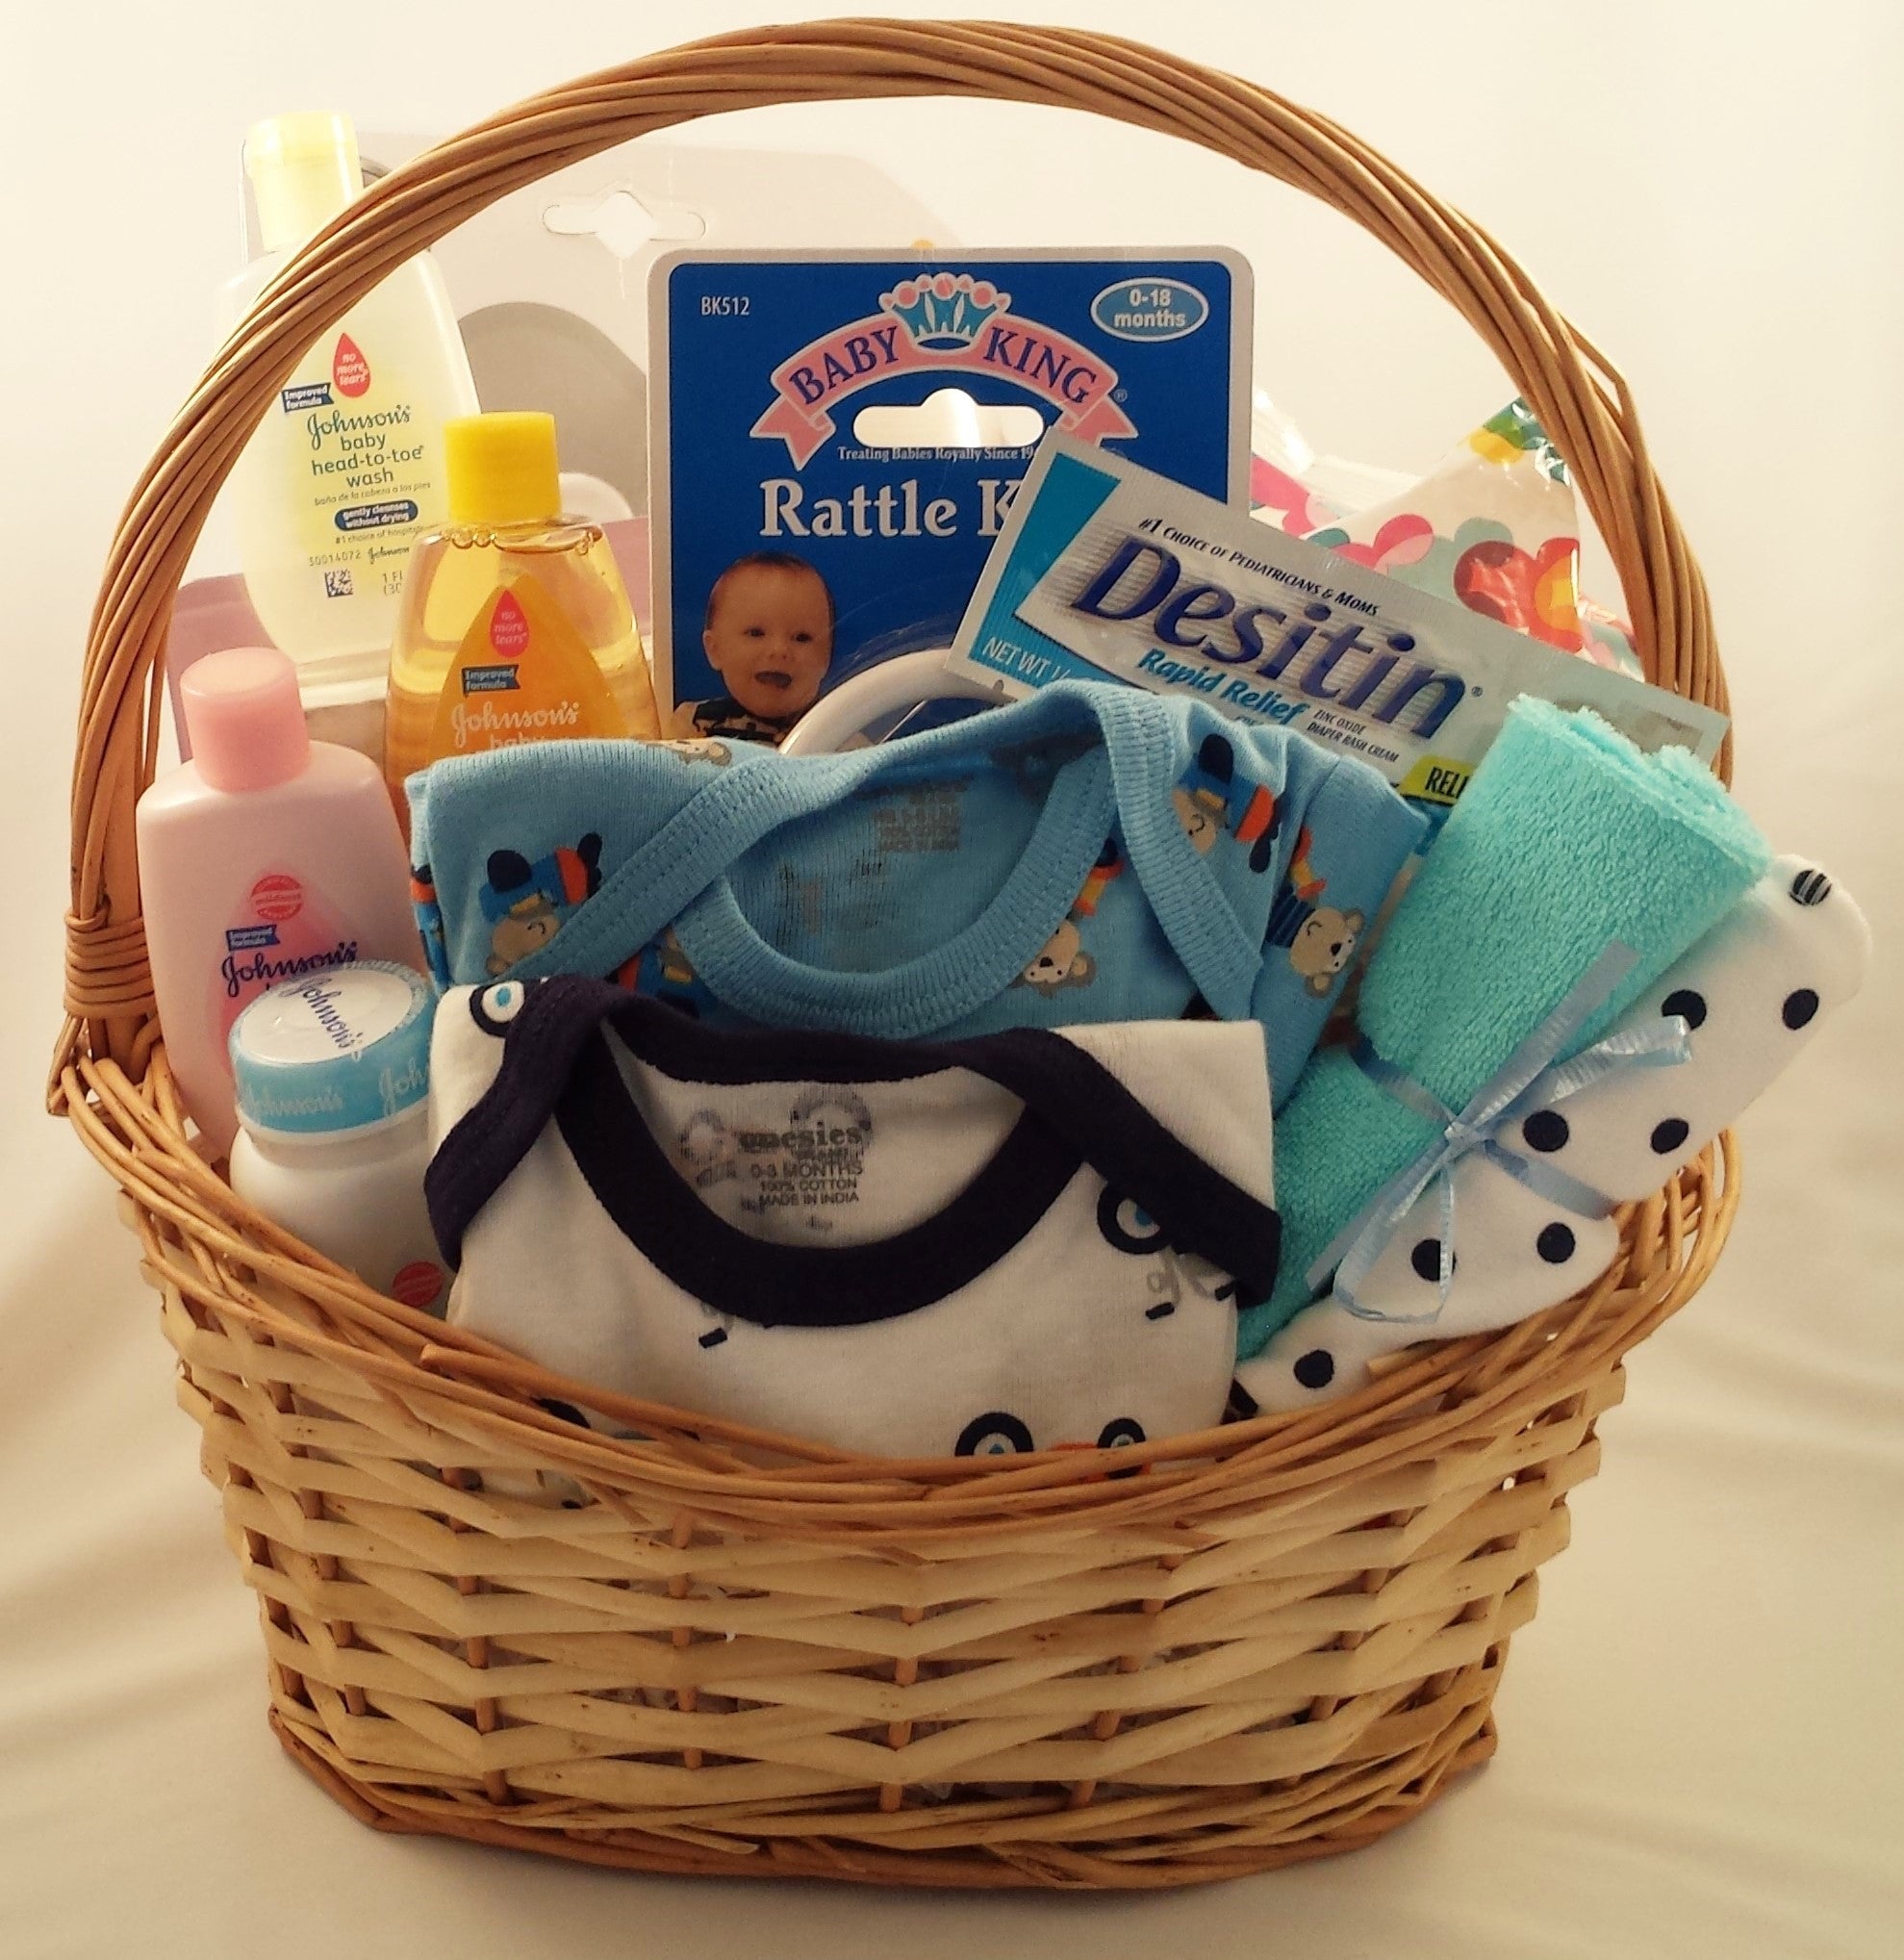 Here Comes the Bride Wedding Gift Basket